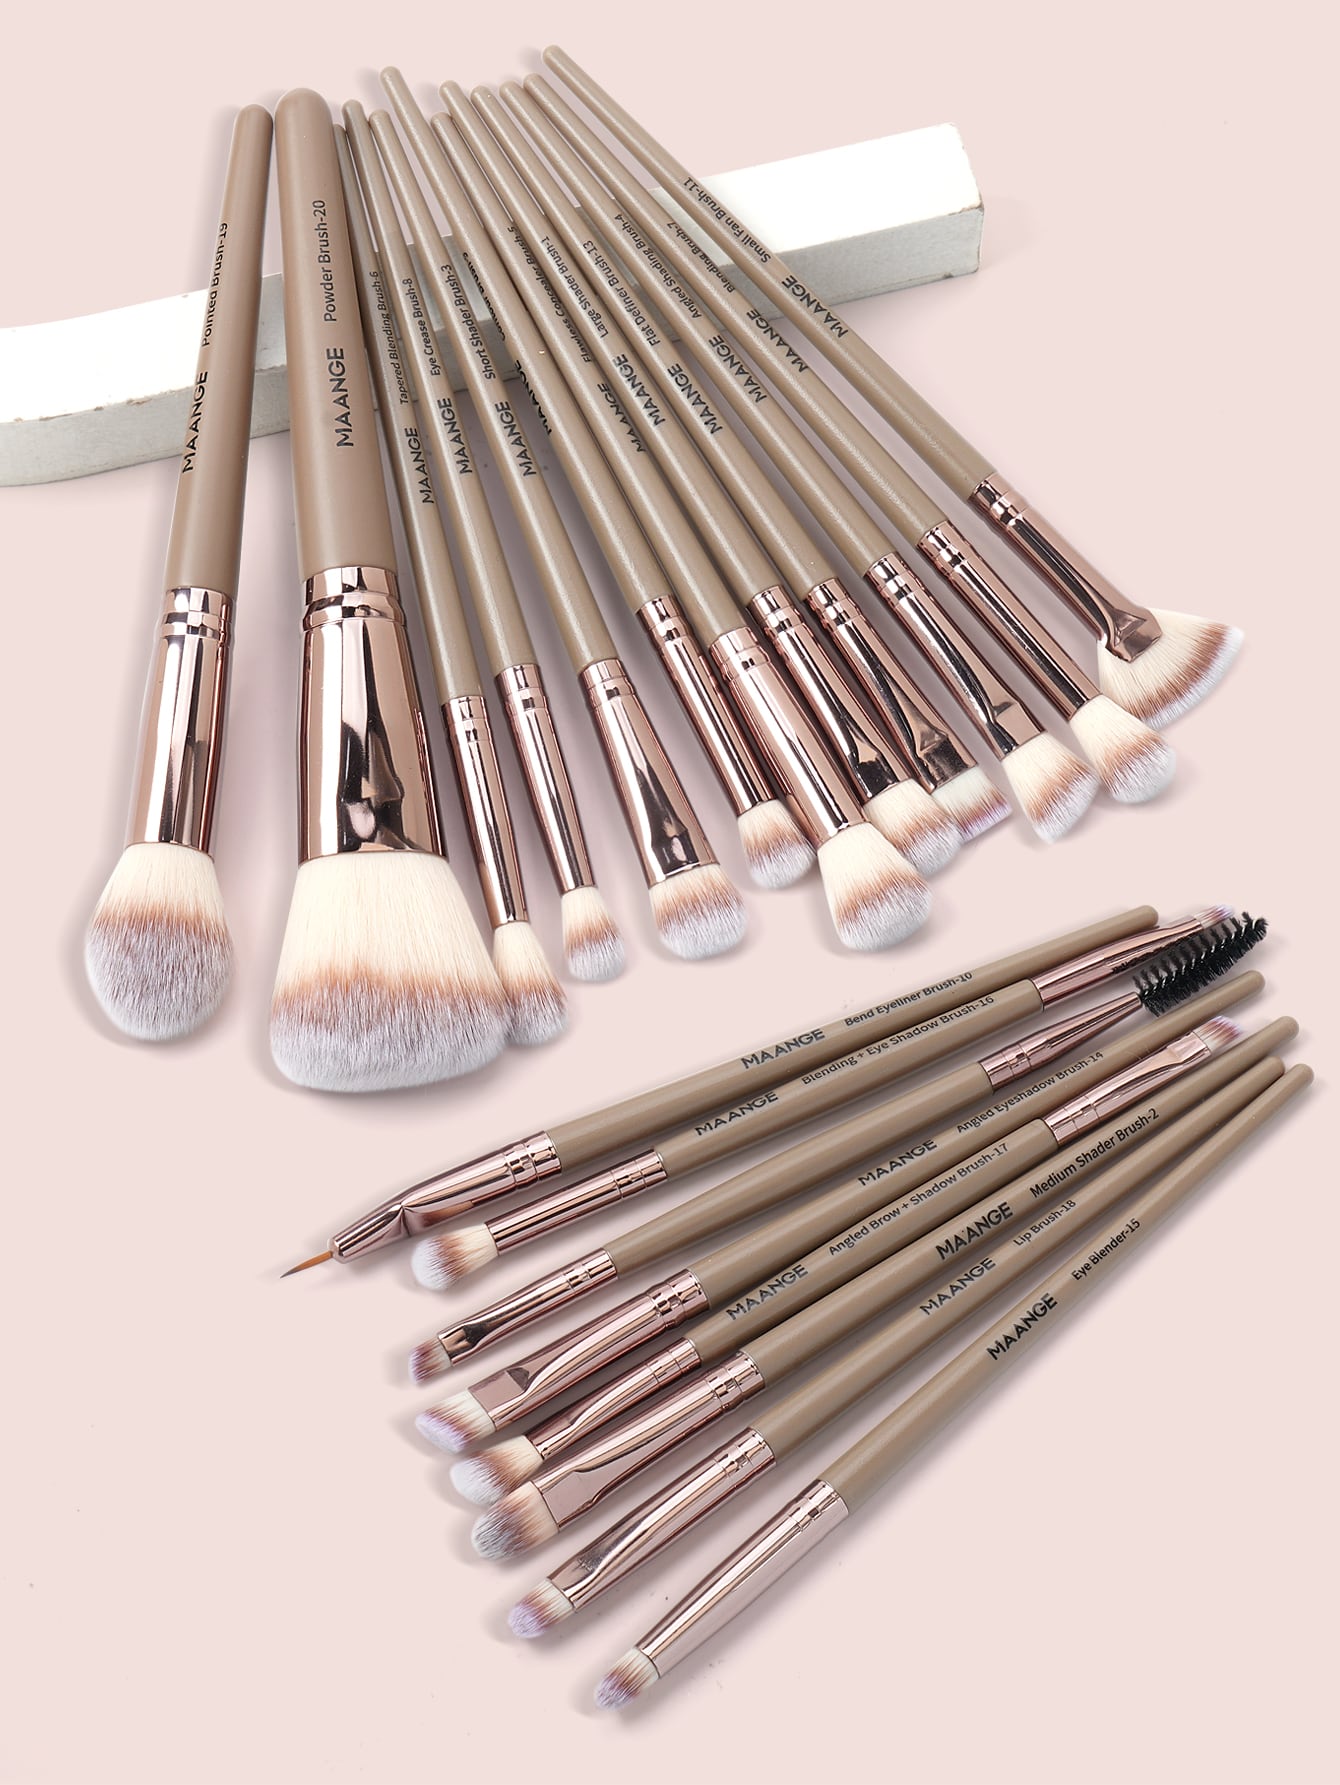 20pcs Professional Makeup Brush Set,Makeup Tools With Soft Brush Hair For Easy Carrying,Foundation Brush,Eye Shadow Brush,Eyebrow Brush,Concealer Brush,Contour Brush,Brush Set For Travel - Negative Apparel